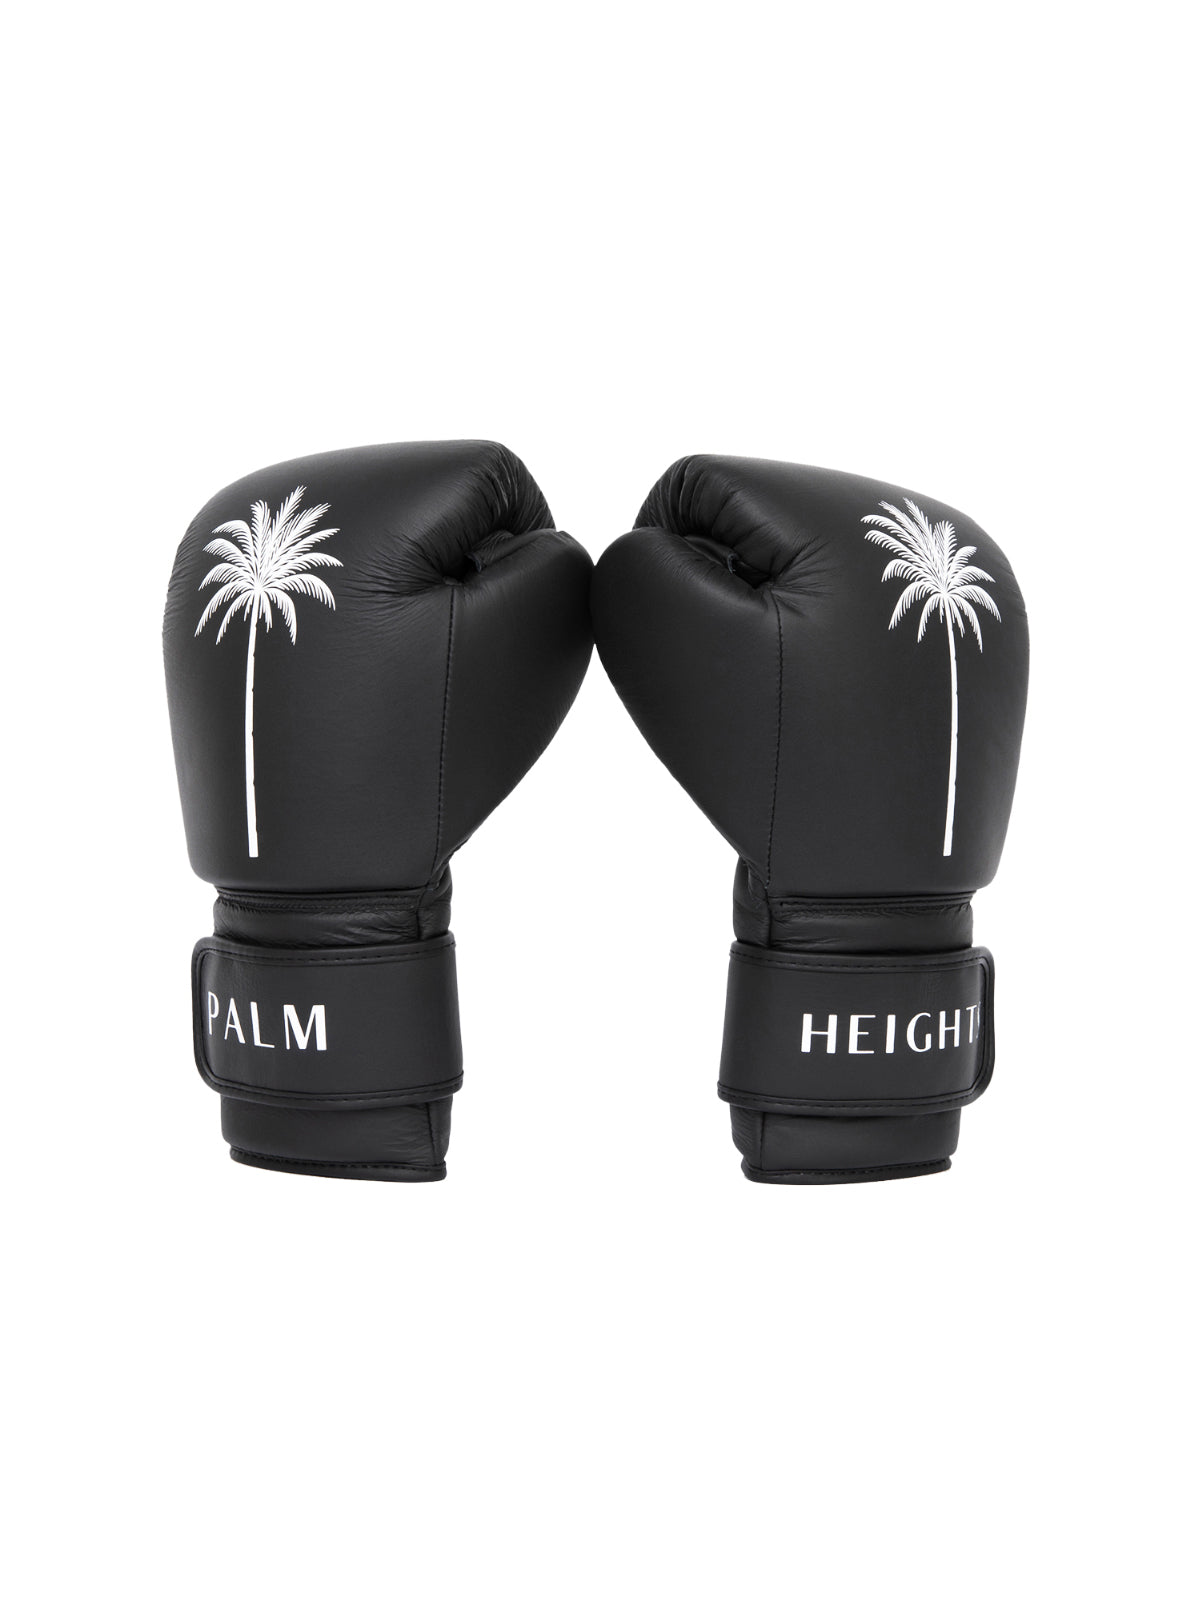 Palm Heights Athletics Signature Boxing Gloves